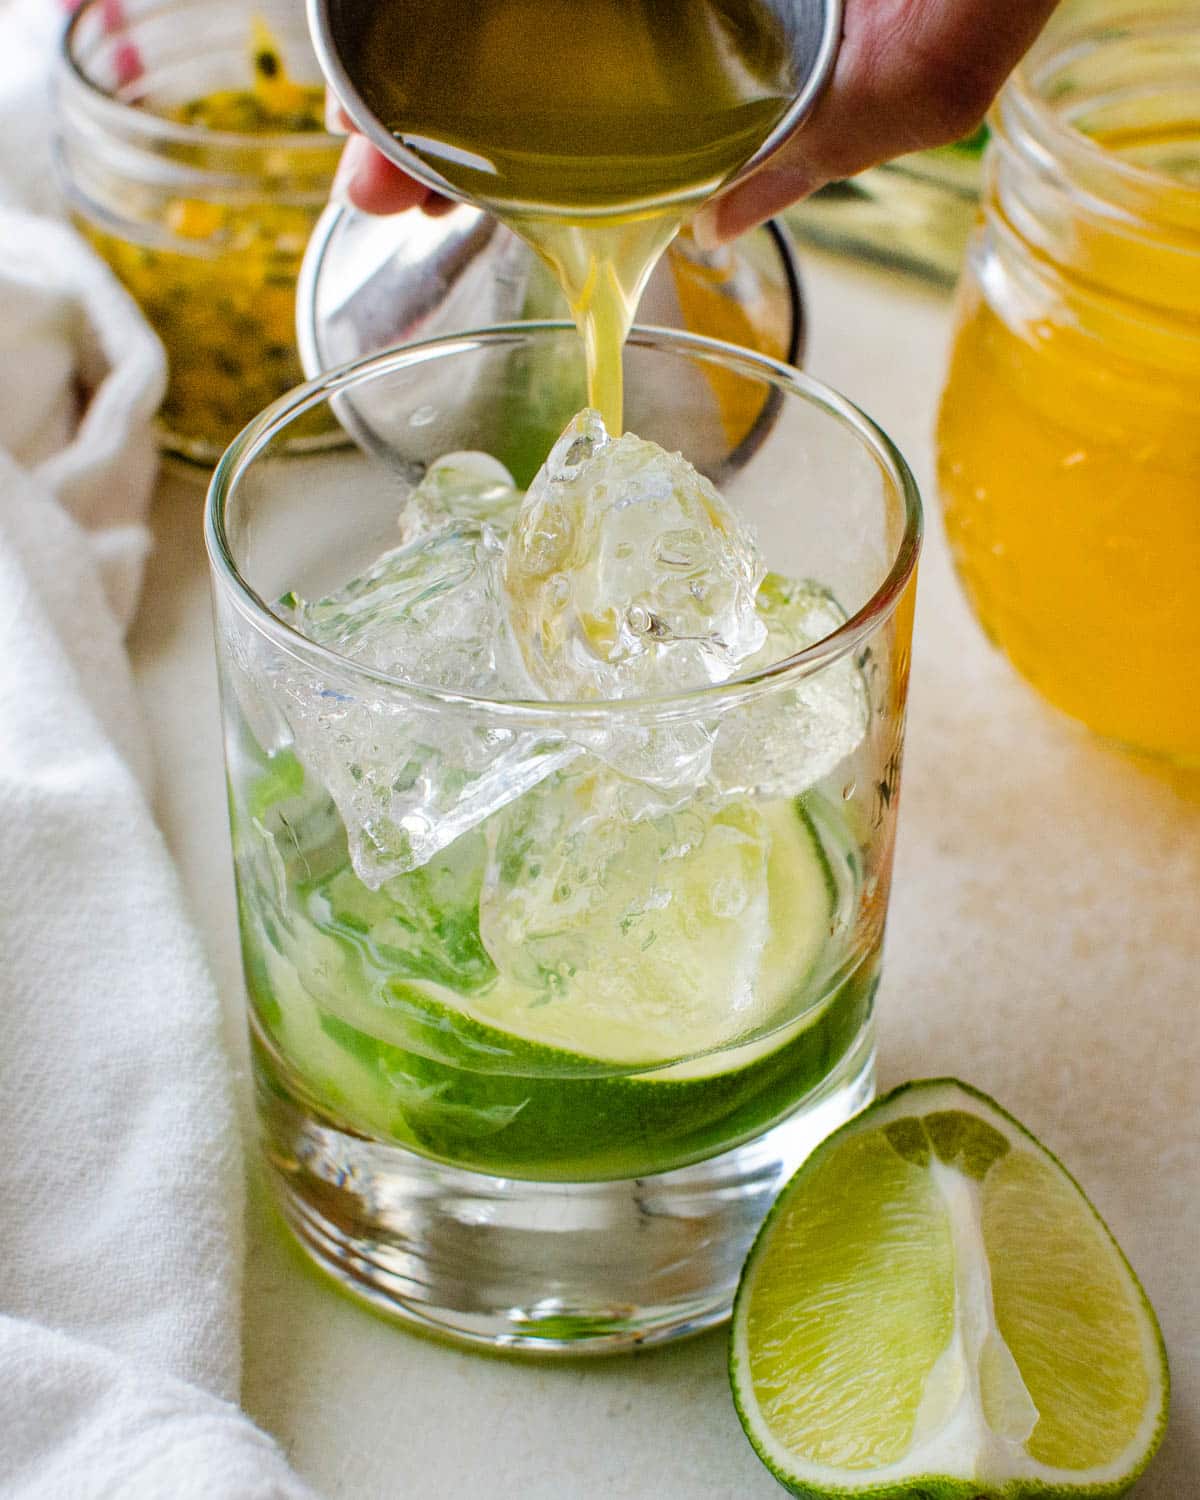 Adding Passion Fruit syrup to the muddled lime and jalapenos.